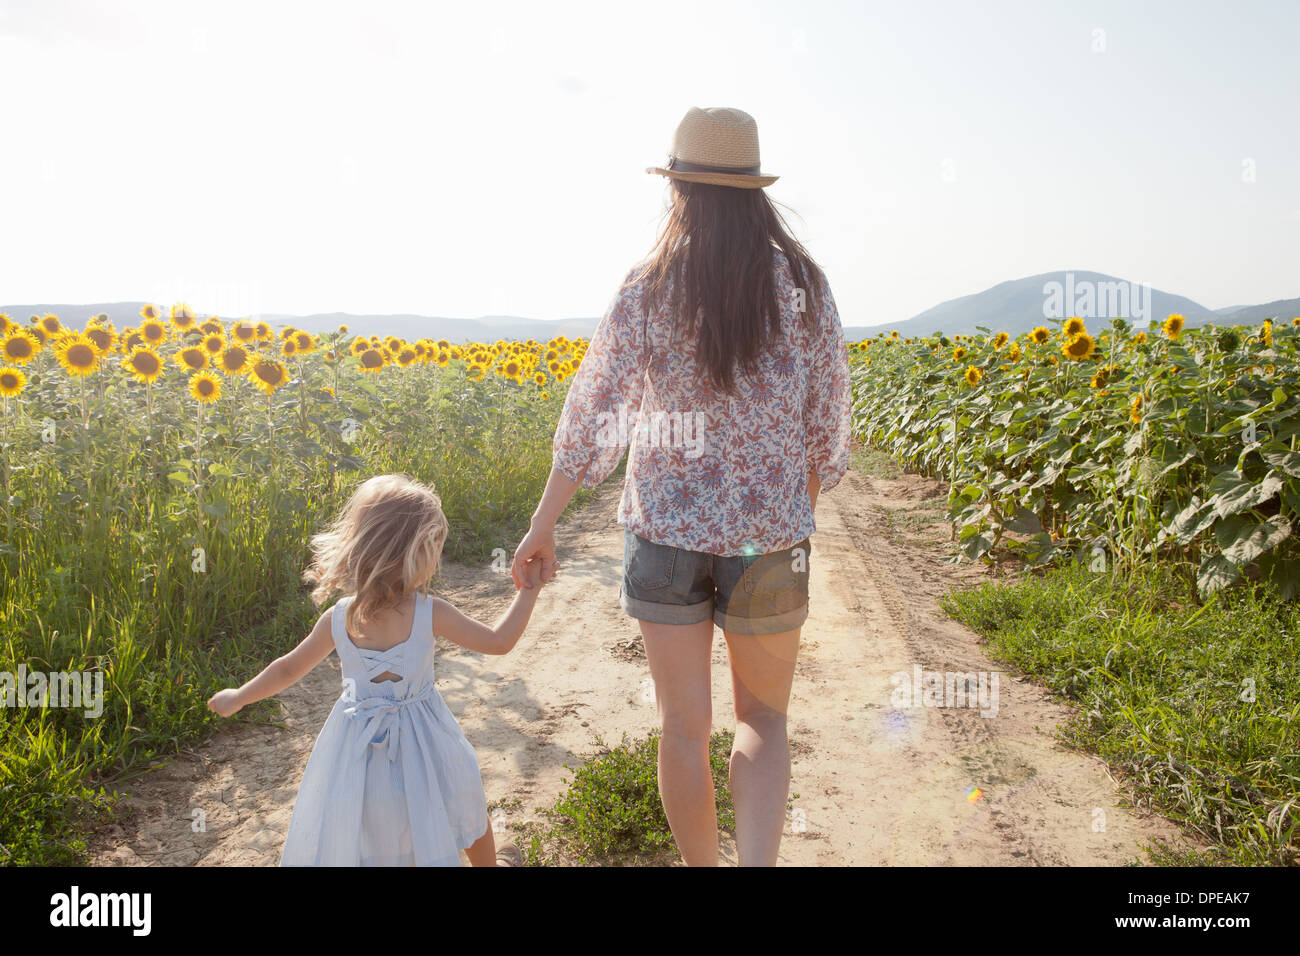 Mother and daughter walking through field of sunflowers Stock Photo